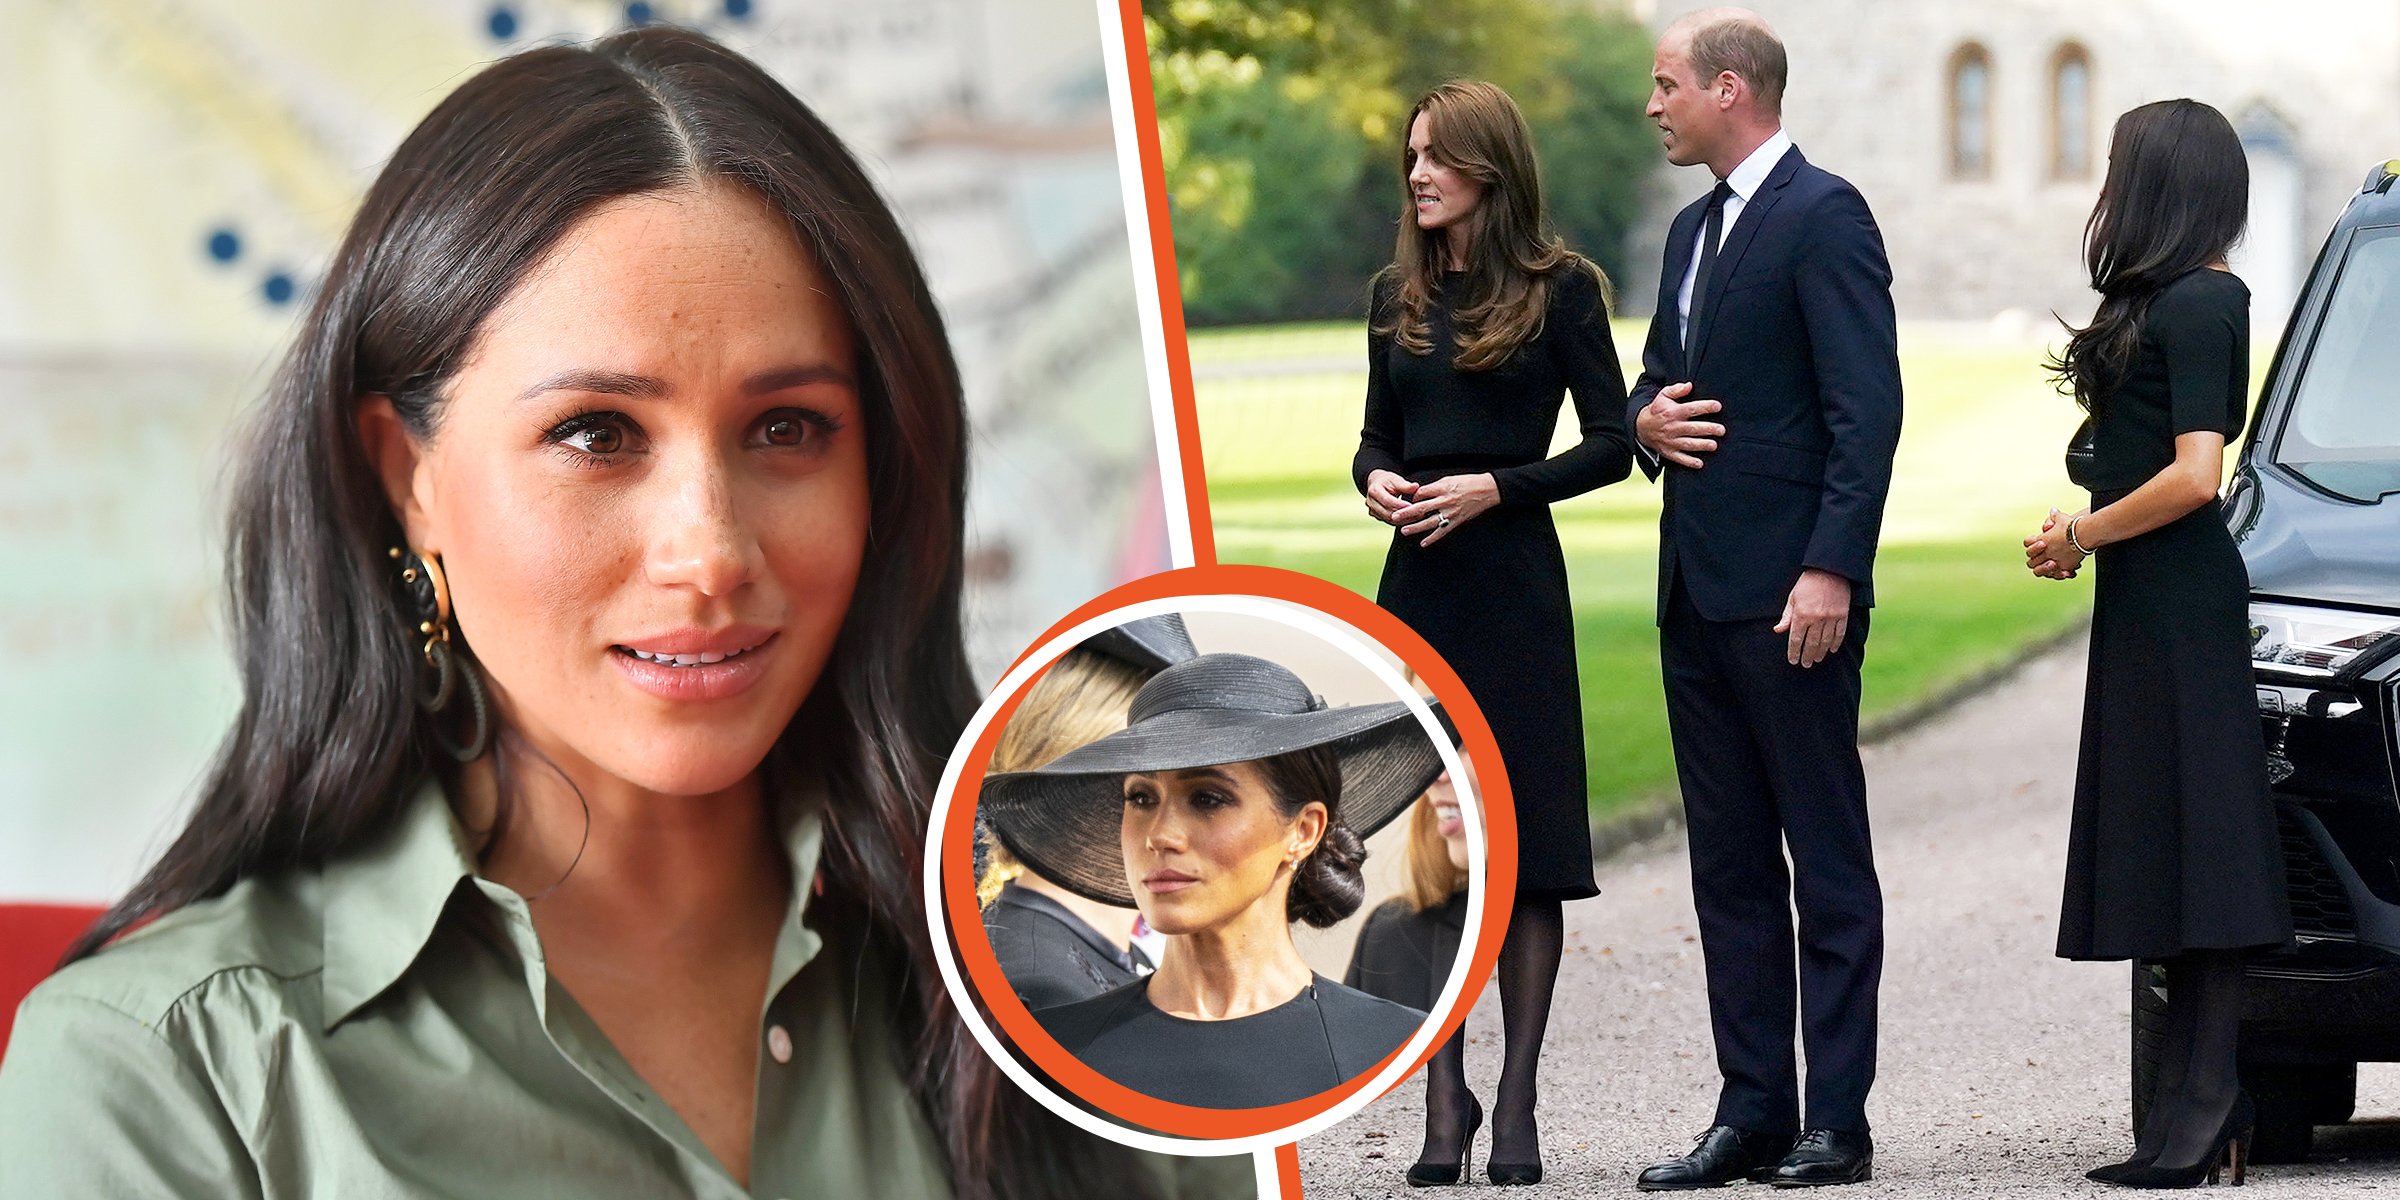 Meghan Markle┃Kate Middleton, Prince William and Meghan Markle ┃Source: Getty Images